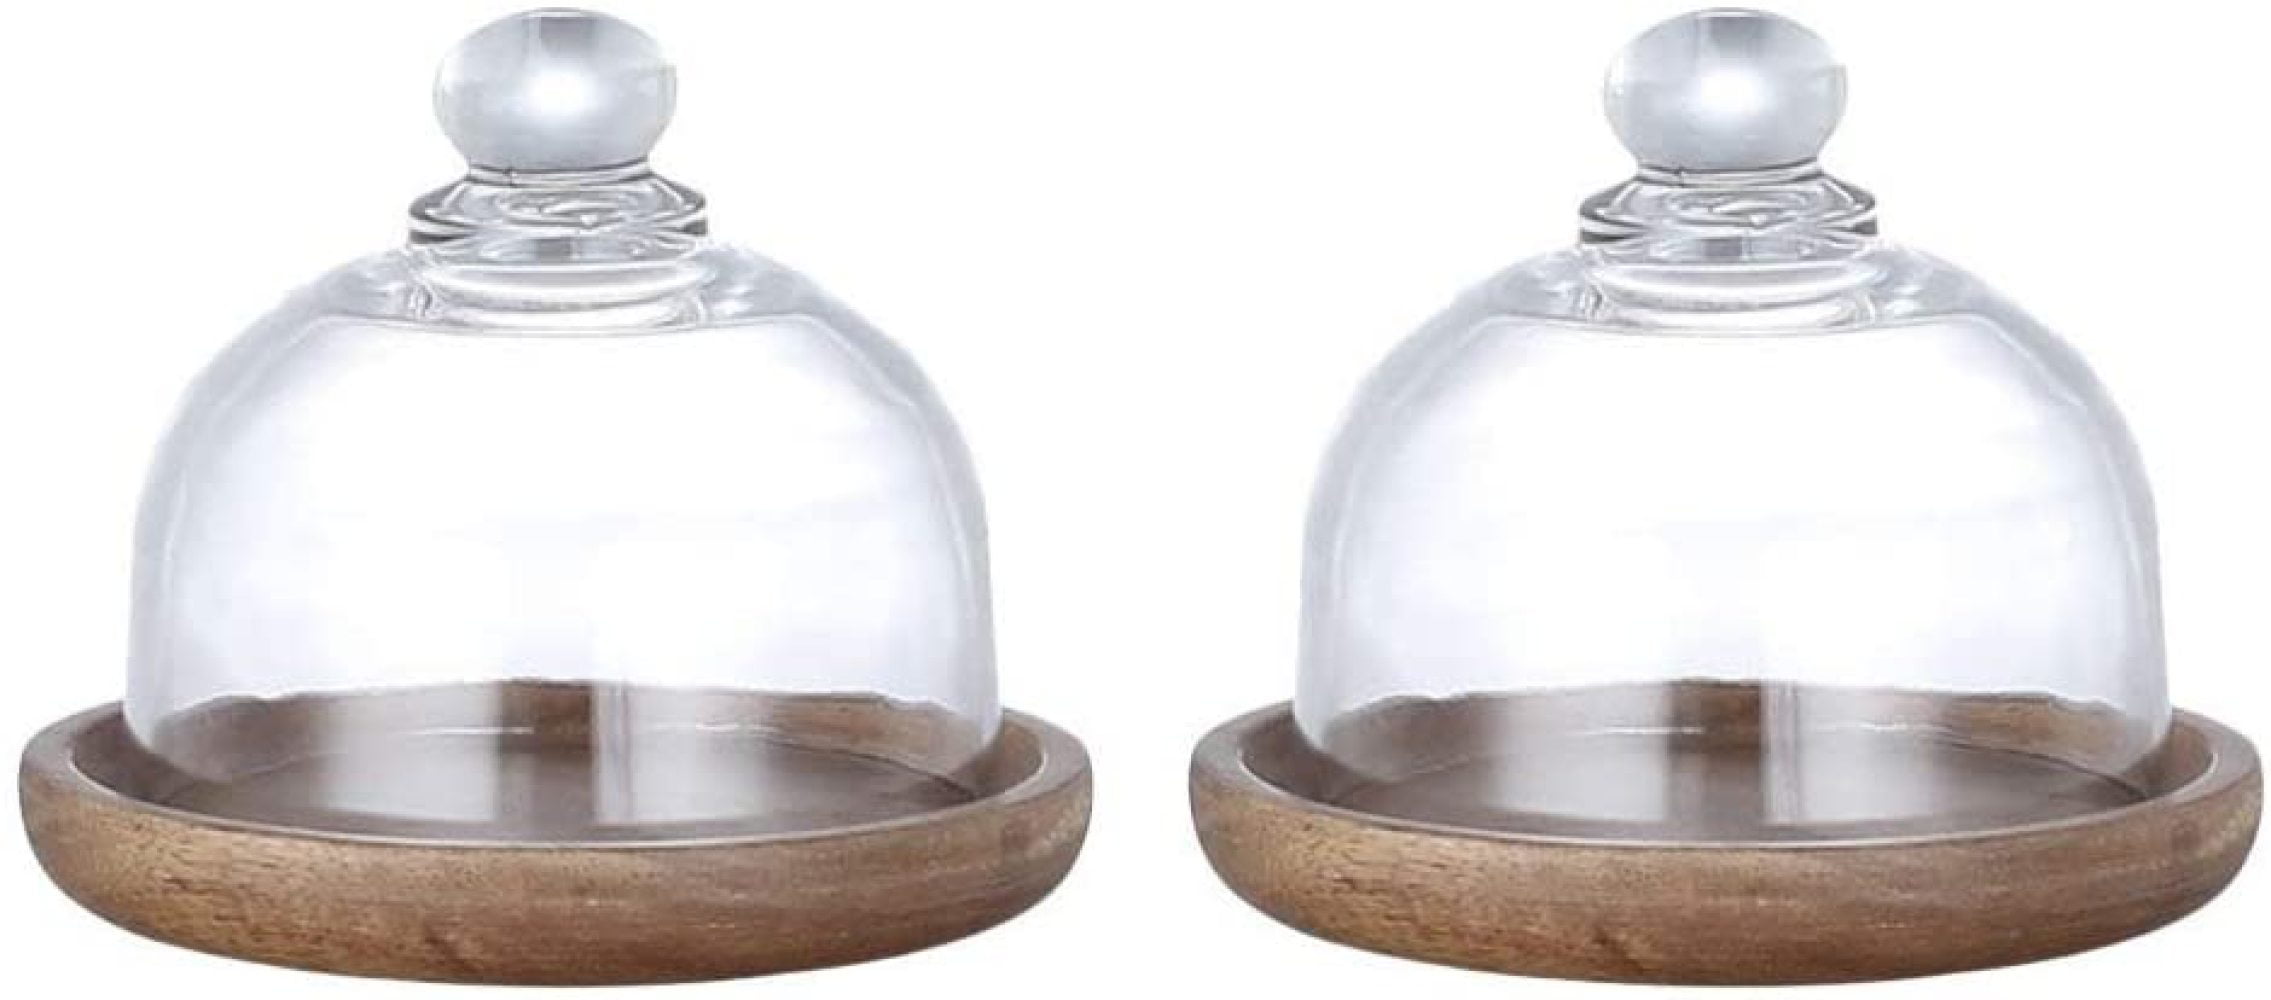 Mini Display Bell Jar Cover Dome with Base Stand Landscape Home Ornaments Decor 